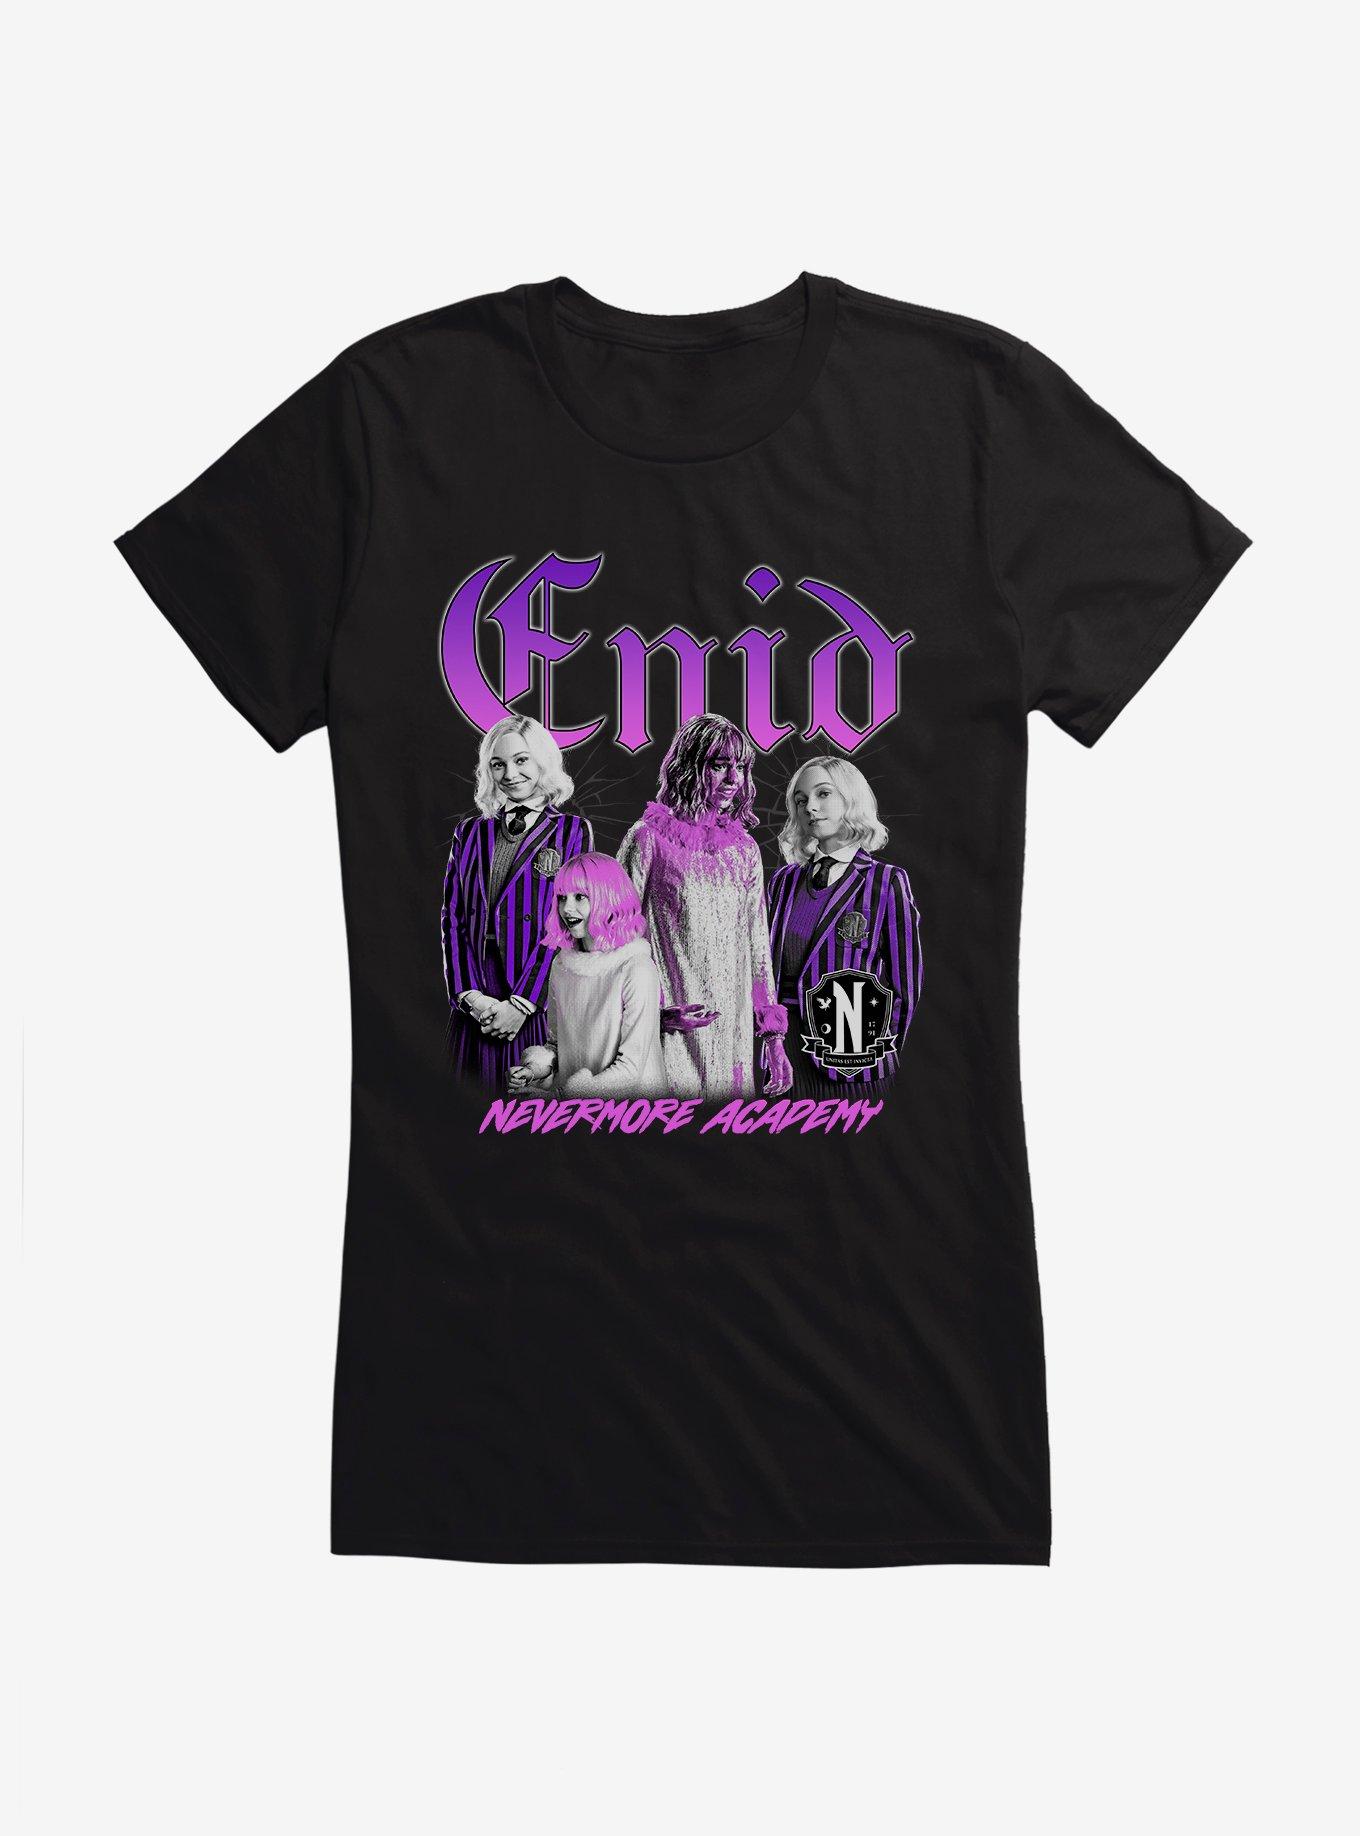 Wednesday Enid Nevermore Academy Girls T-Shirt, BLACK, hi-res